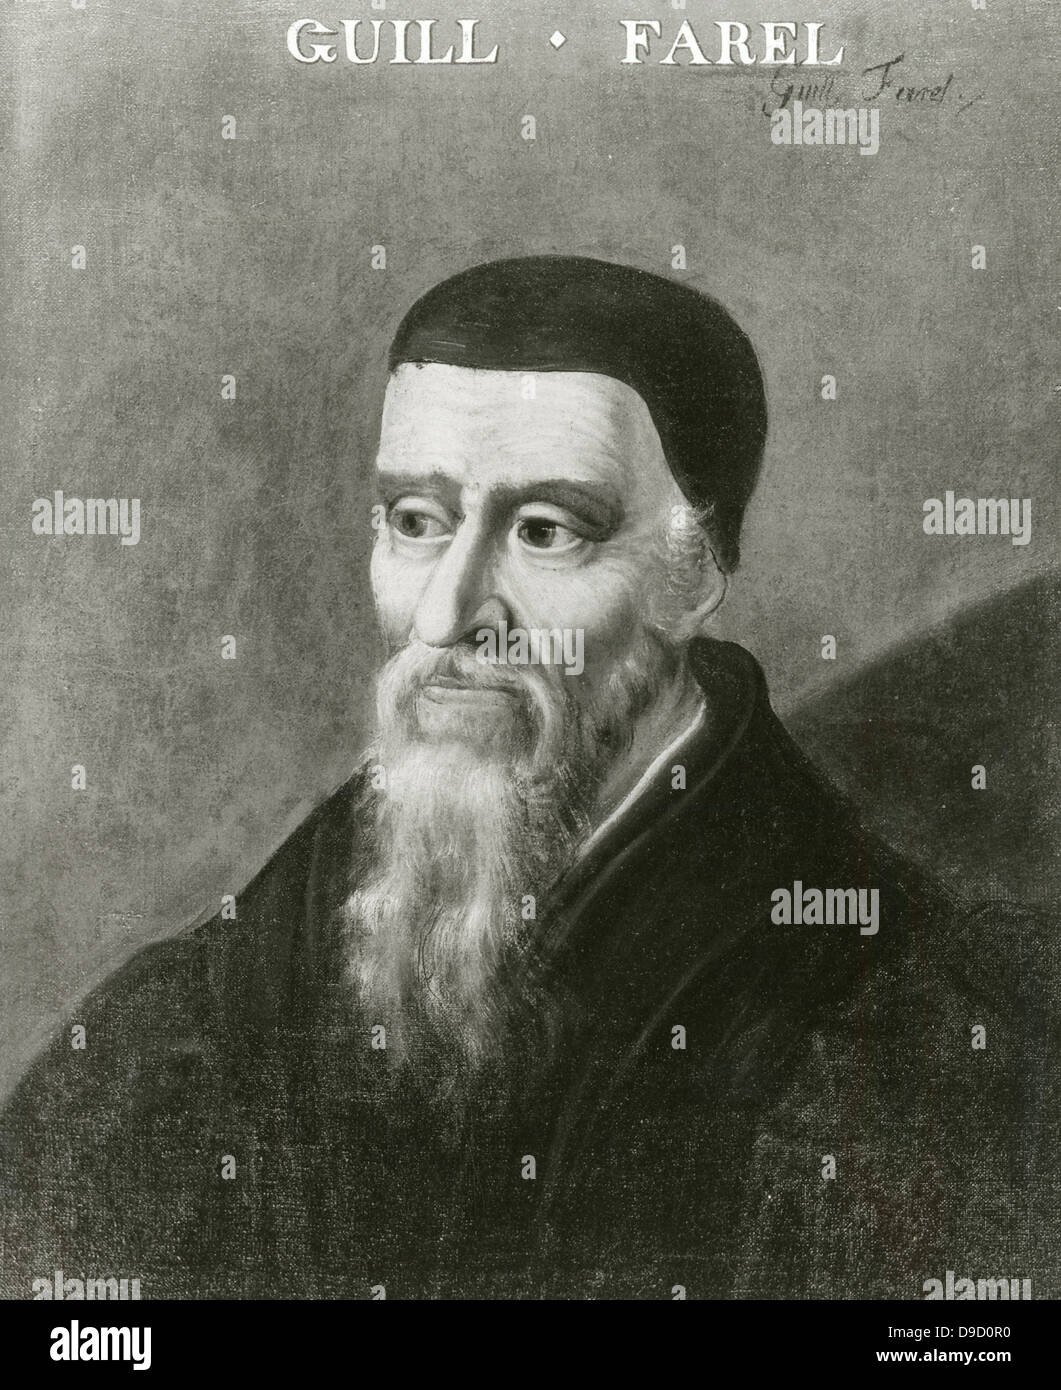 William Farel (1489-1565) French Protestant evangelist and a founder of the Reformed church. Stock Photo